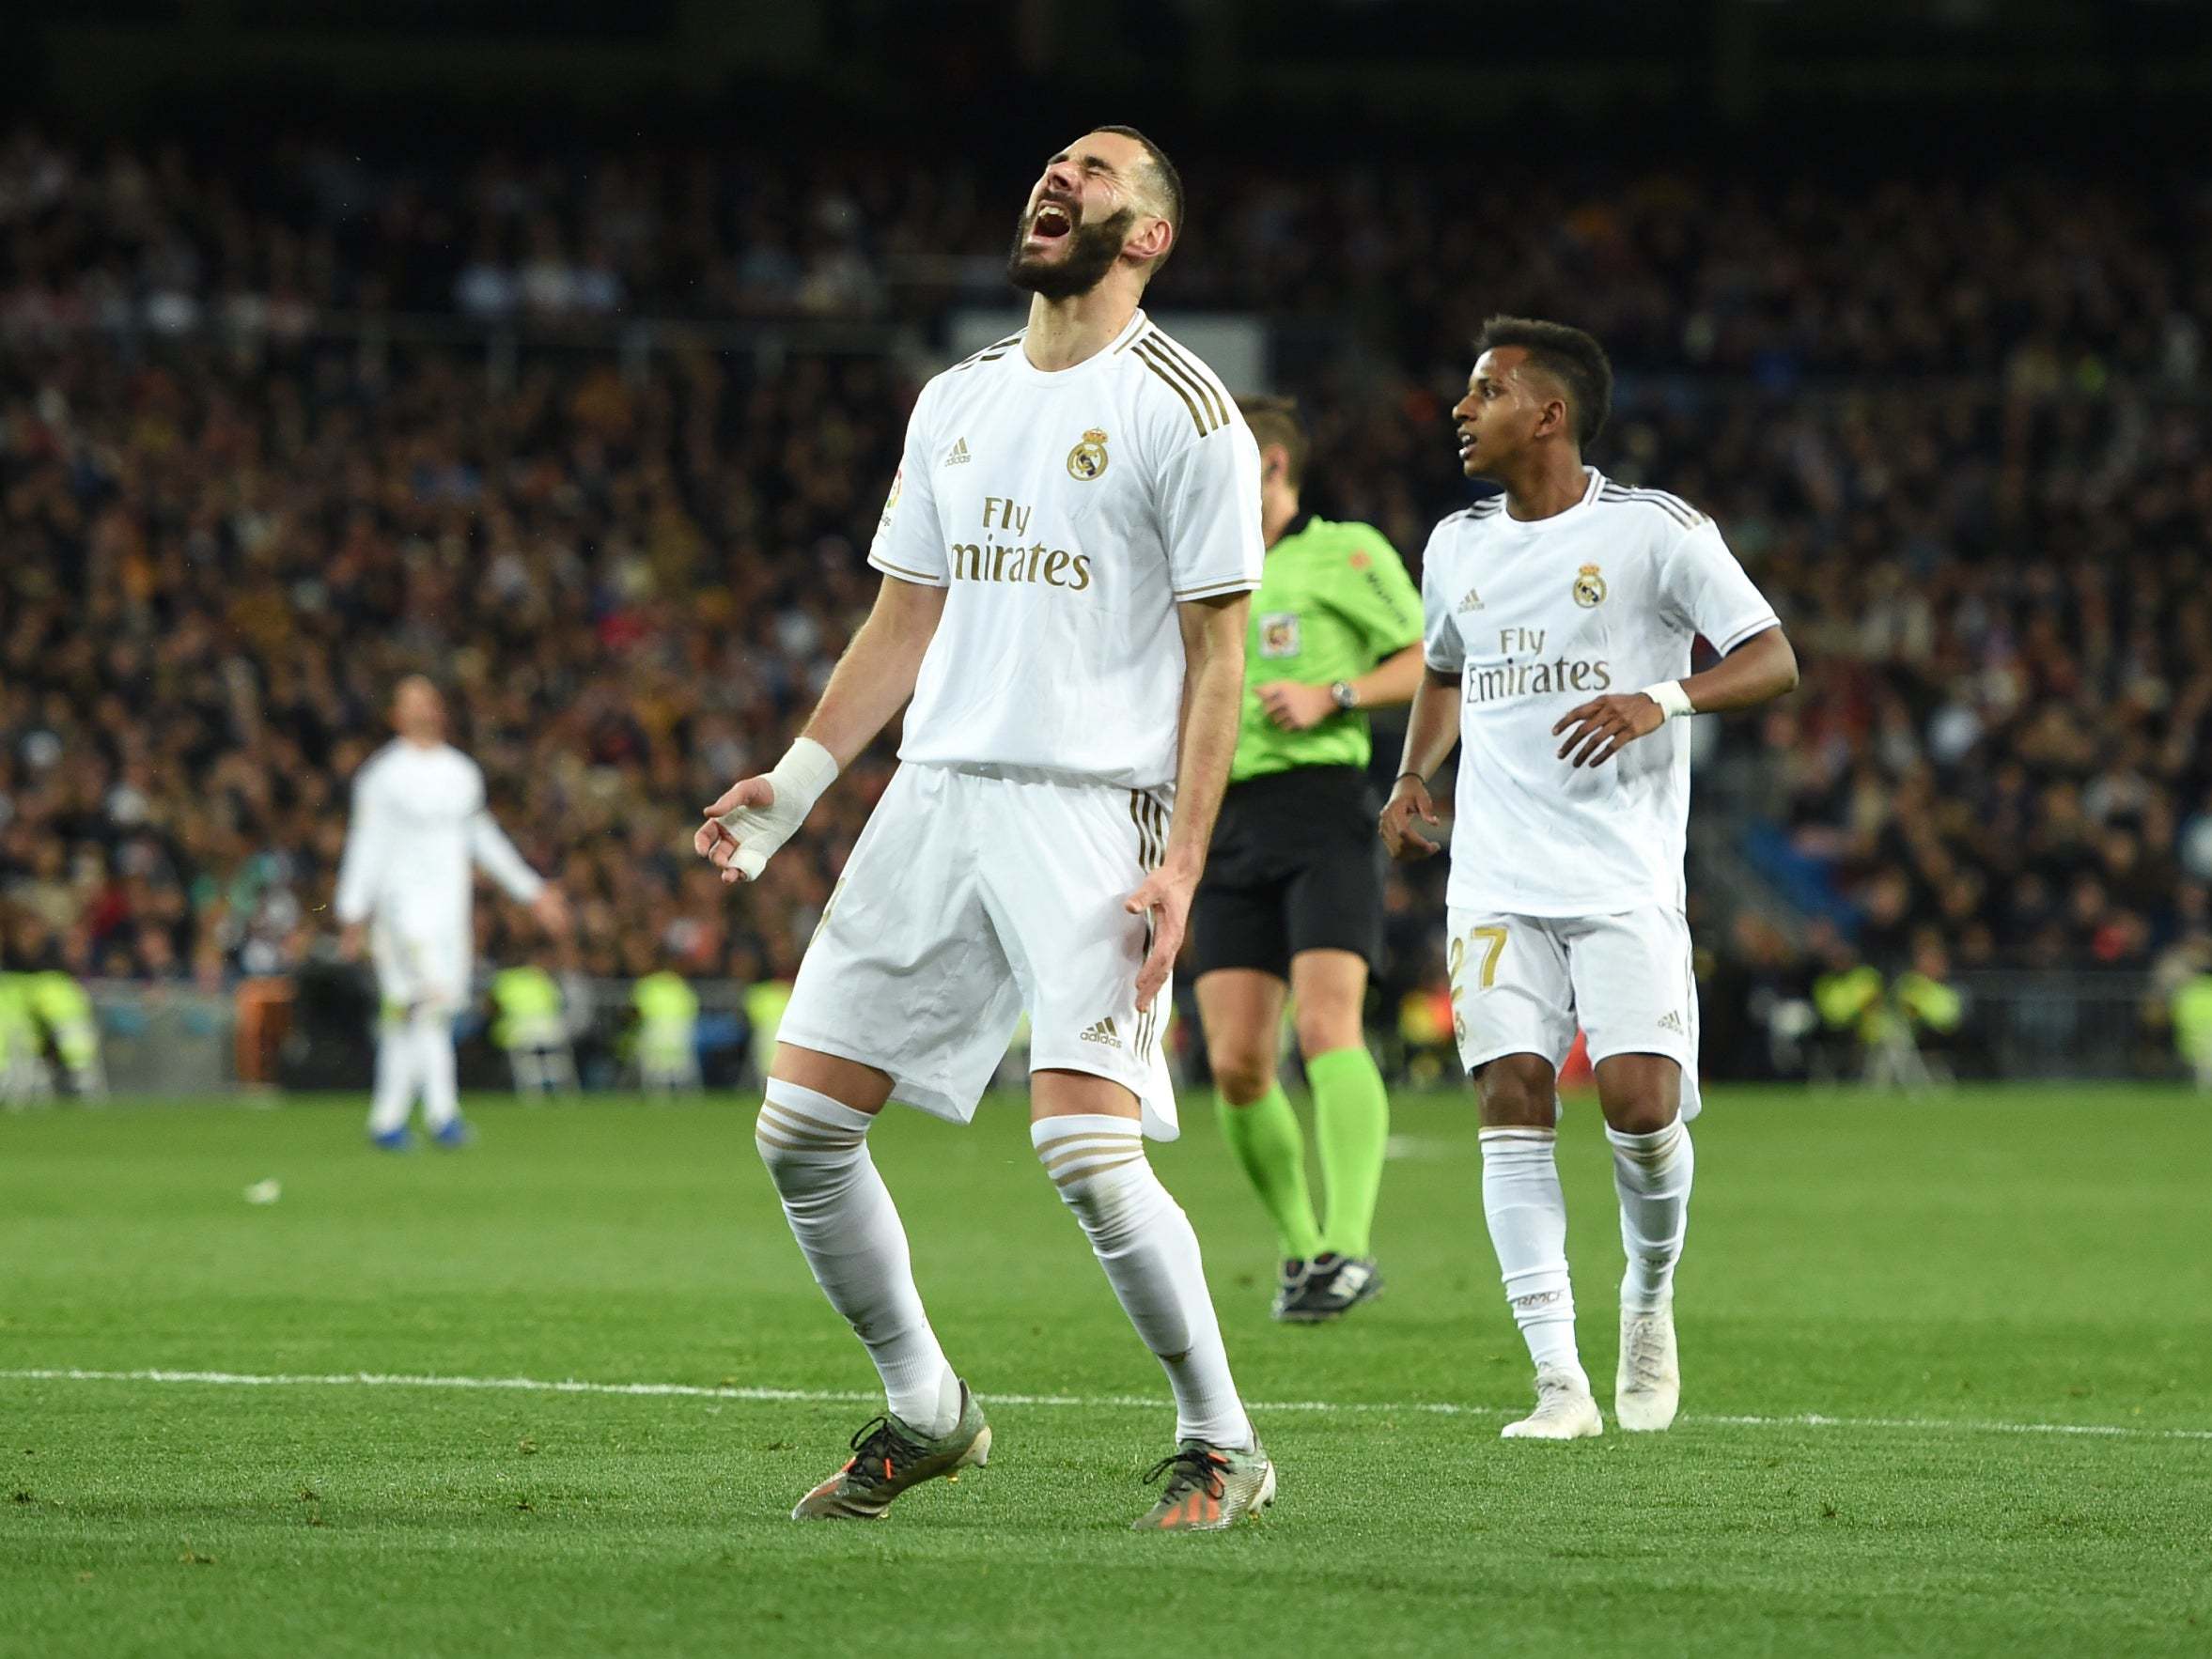 Karim Benzema has looked a one-man army in front of goal for Real Madrid